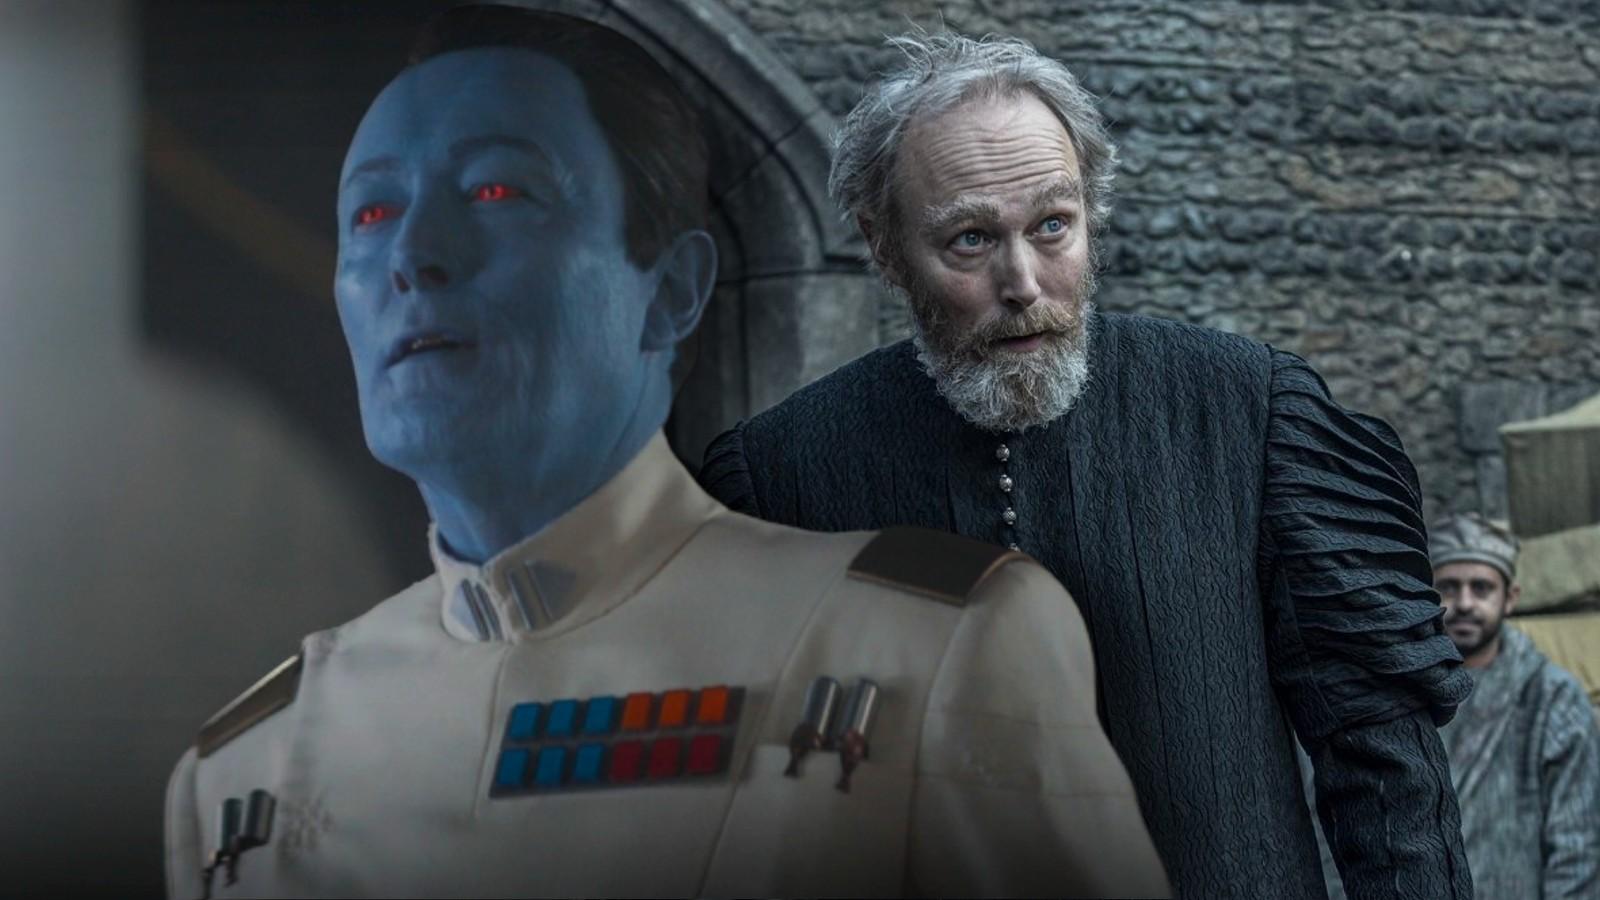 Grand Admiral Thrawn in Ahsoka and Lars Mikkelsen in The Witcher